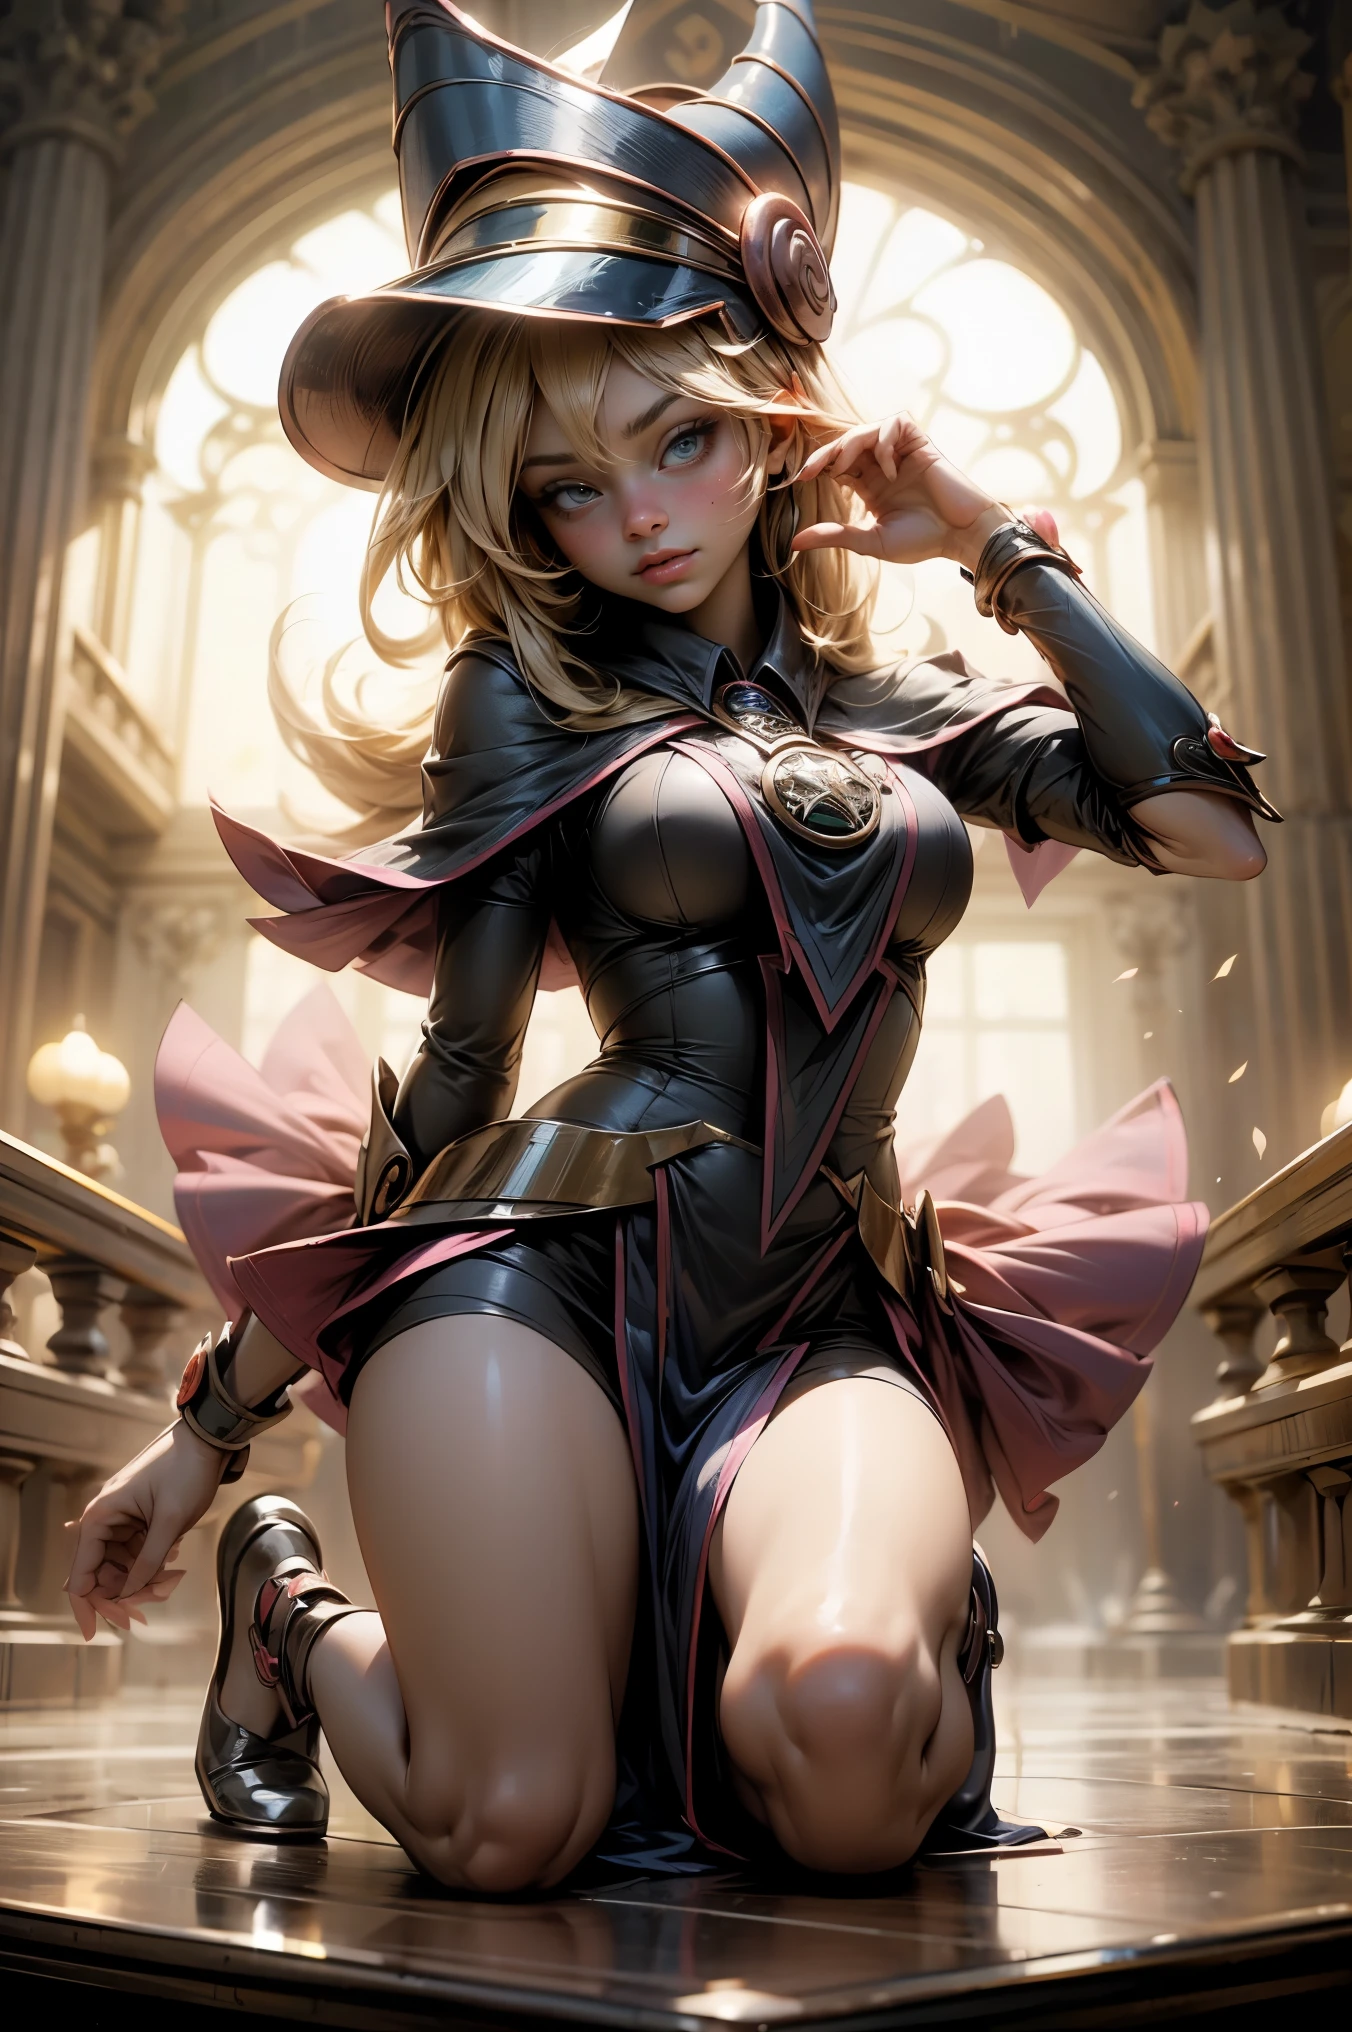 (Masterpiece:1.2), (The best quality:1.2), Perfect lighting, Dark Magician Girl casting a spell, in battle. floating in the air, visible medium tits, transparent neckline, blue robe, big hat, From above, sparkles, Yugioh game, The magic of the heart. LIGHTS OF THE HEART, Romantic heart. She wears heels. has heels. Wear heels 